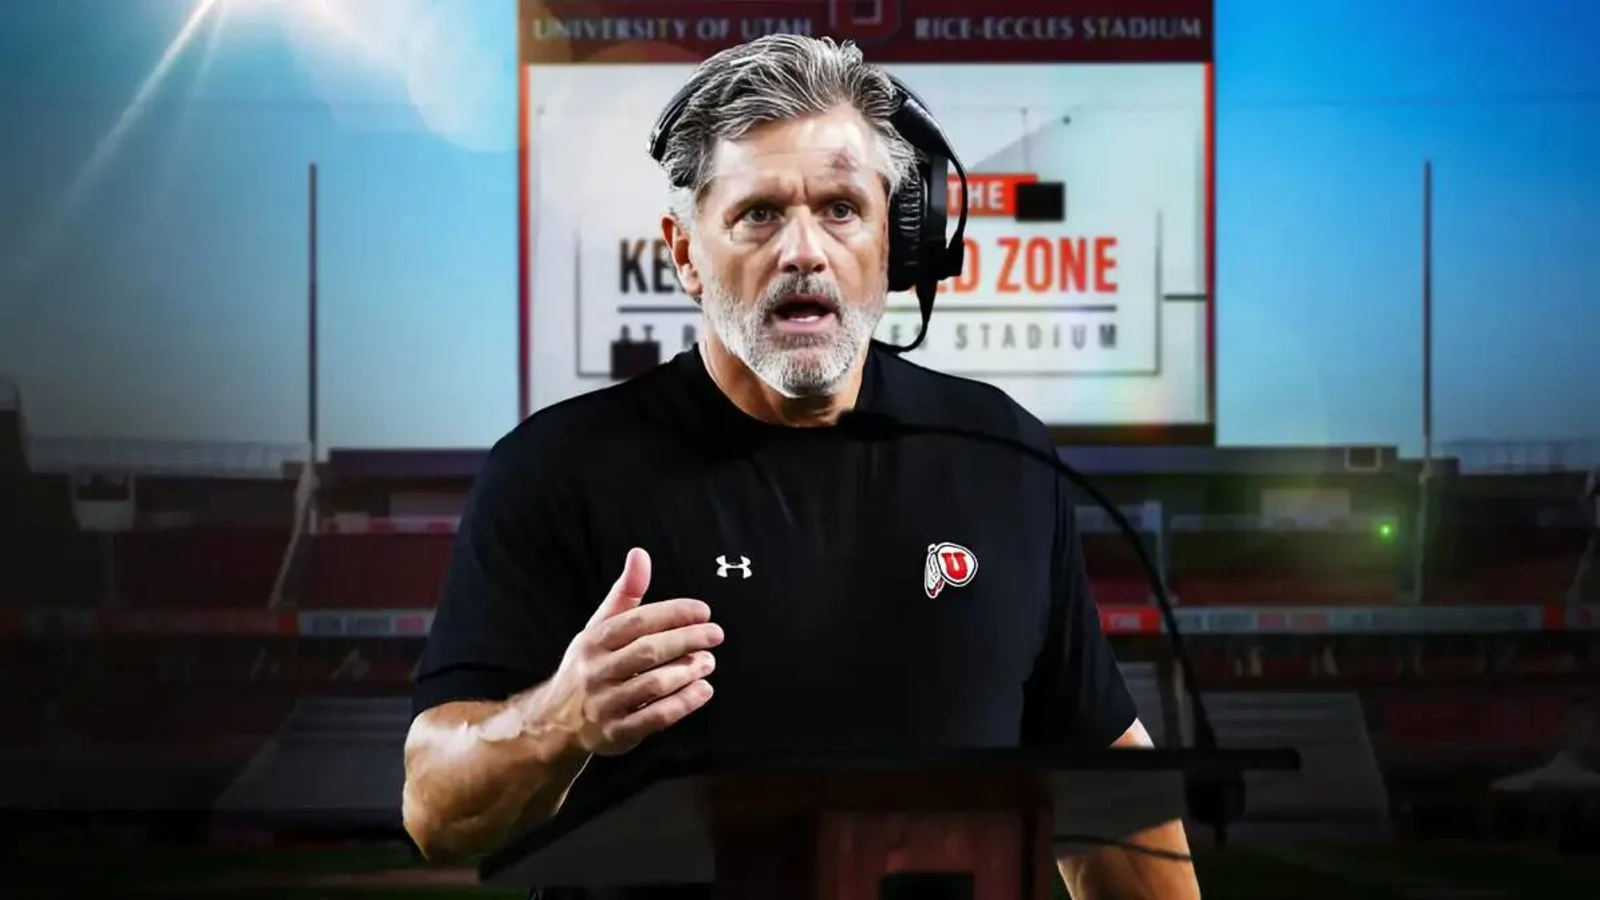 Kyle Whittingham hits Utah football with harsh Big 12 reality compared with Pac-12